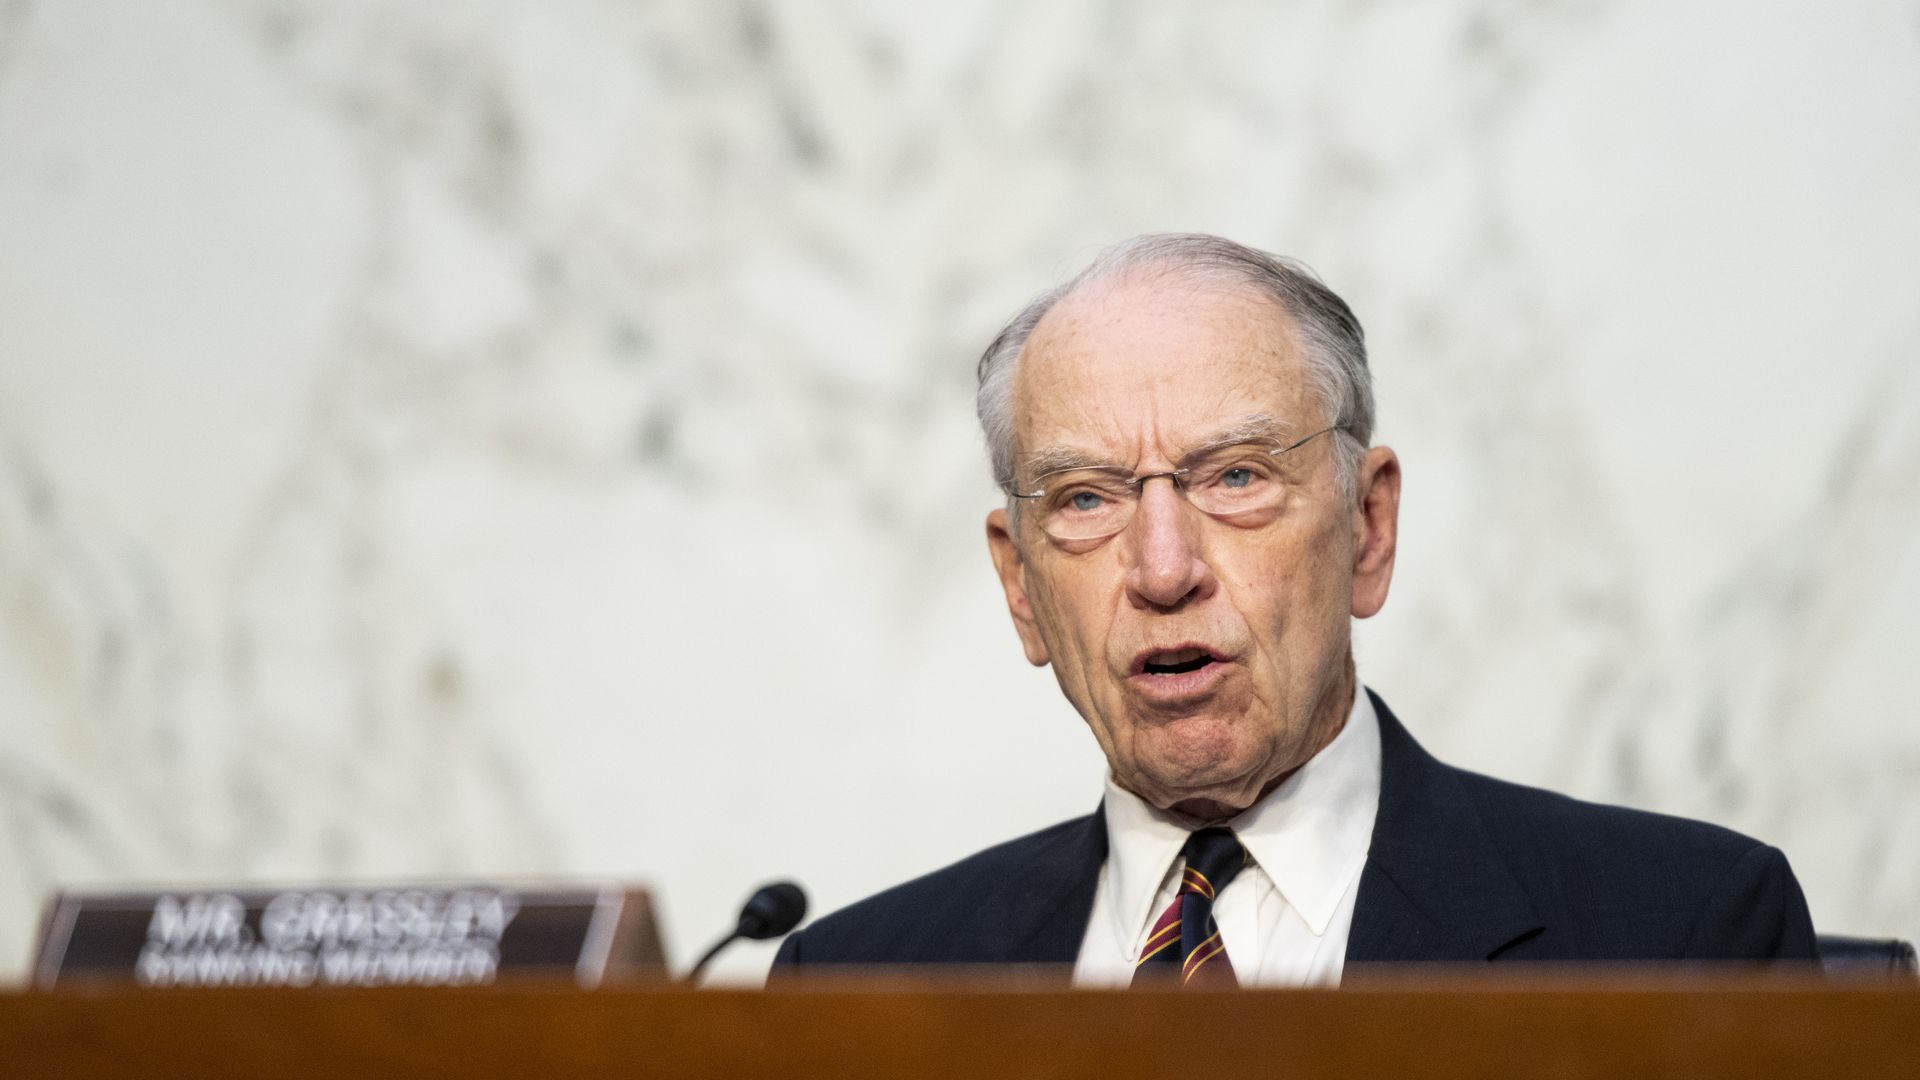 Sen. Chuck Grassley of Iowa is seen speaking during a congressional hearing.